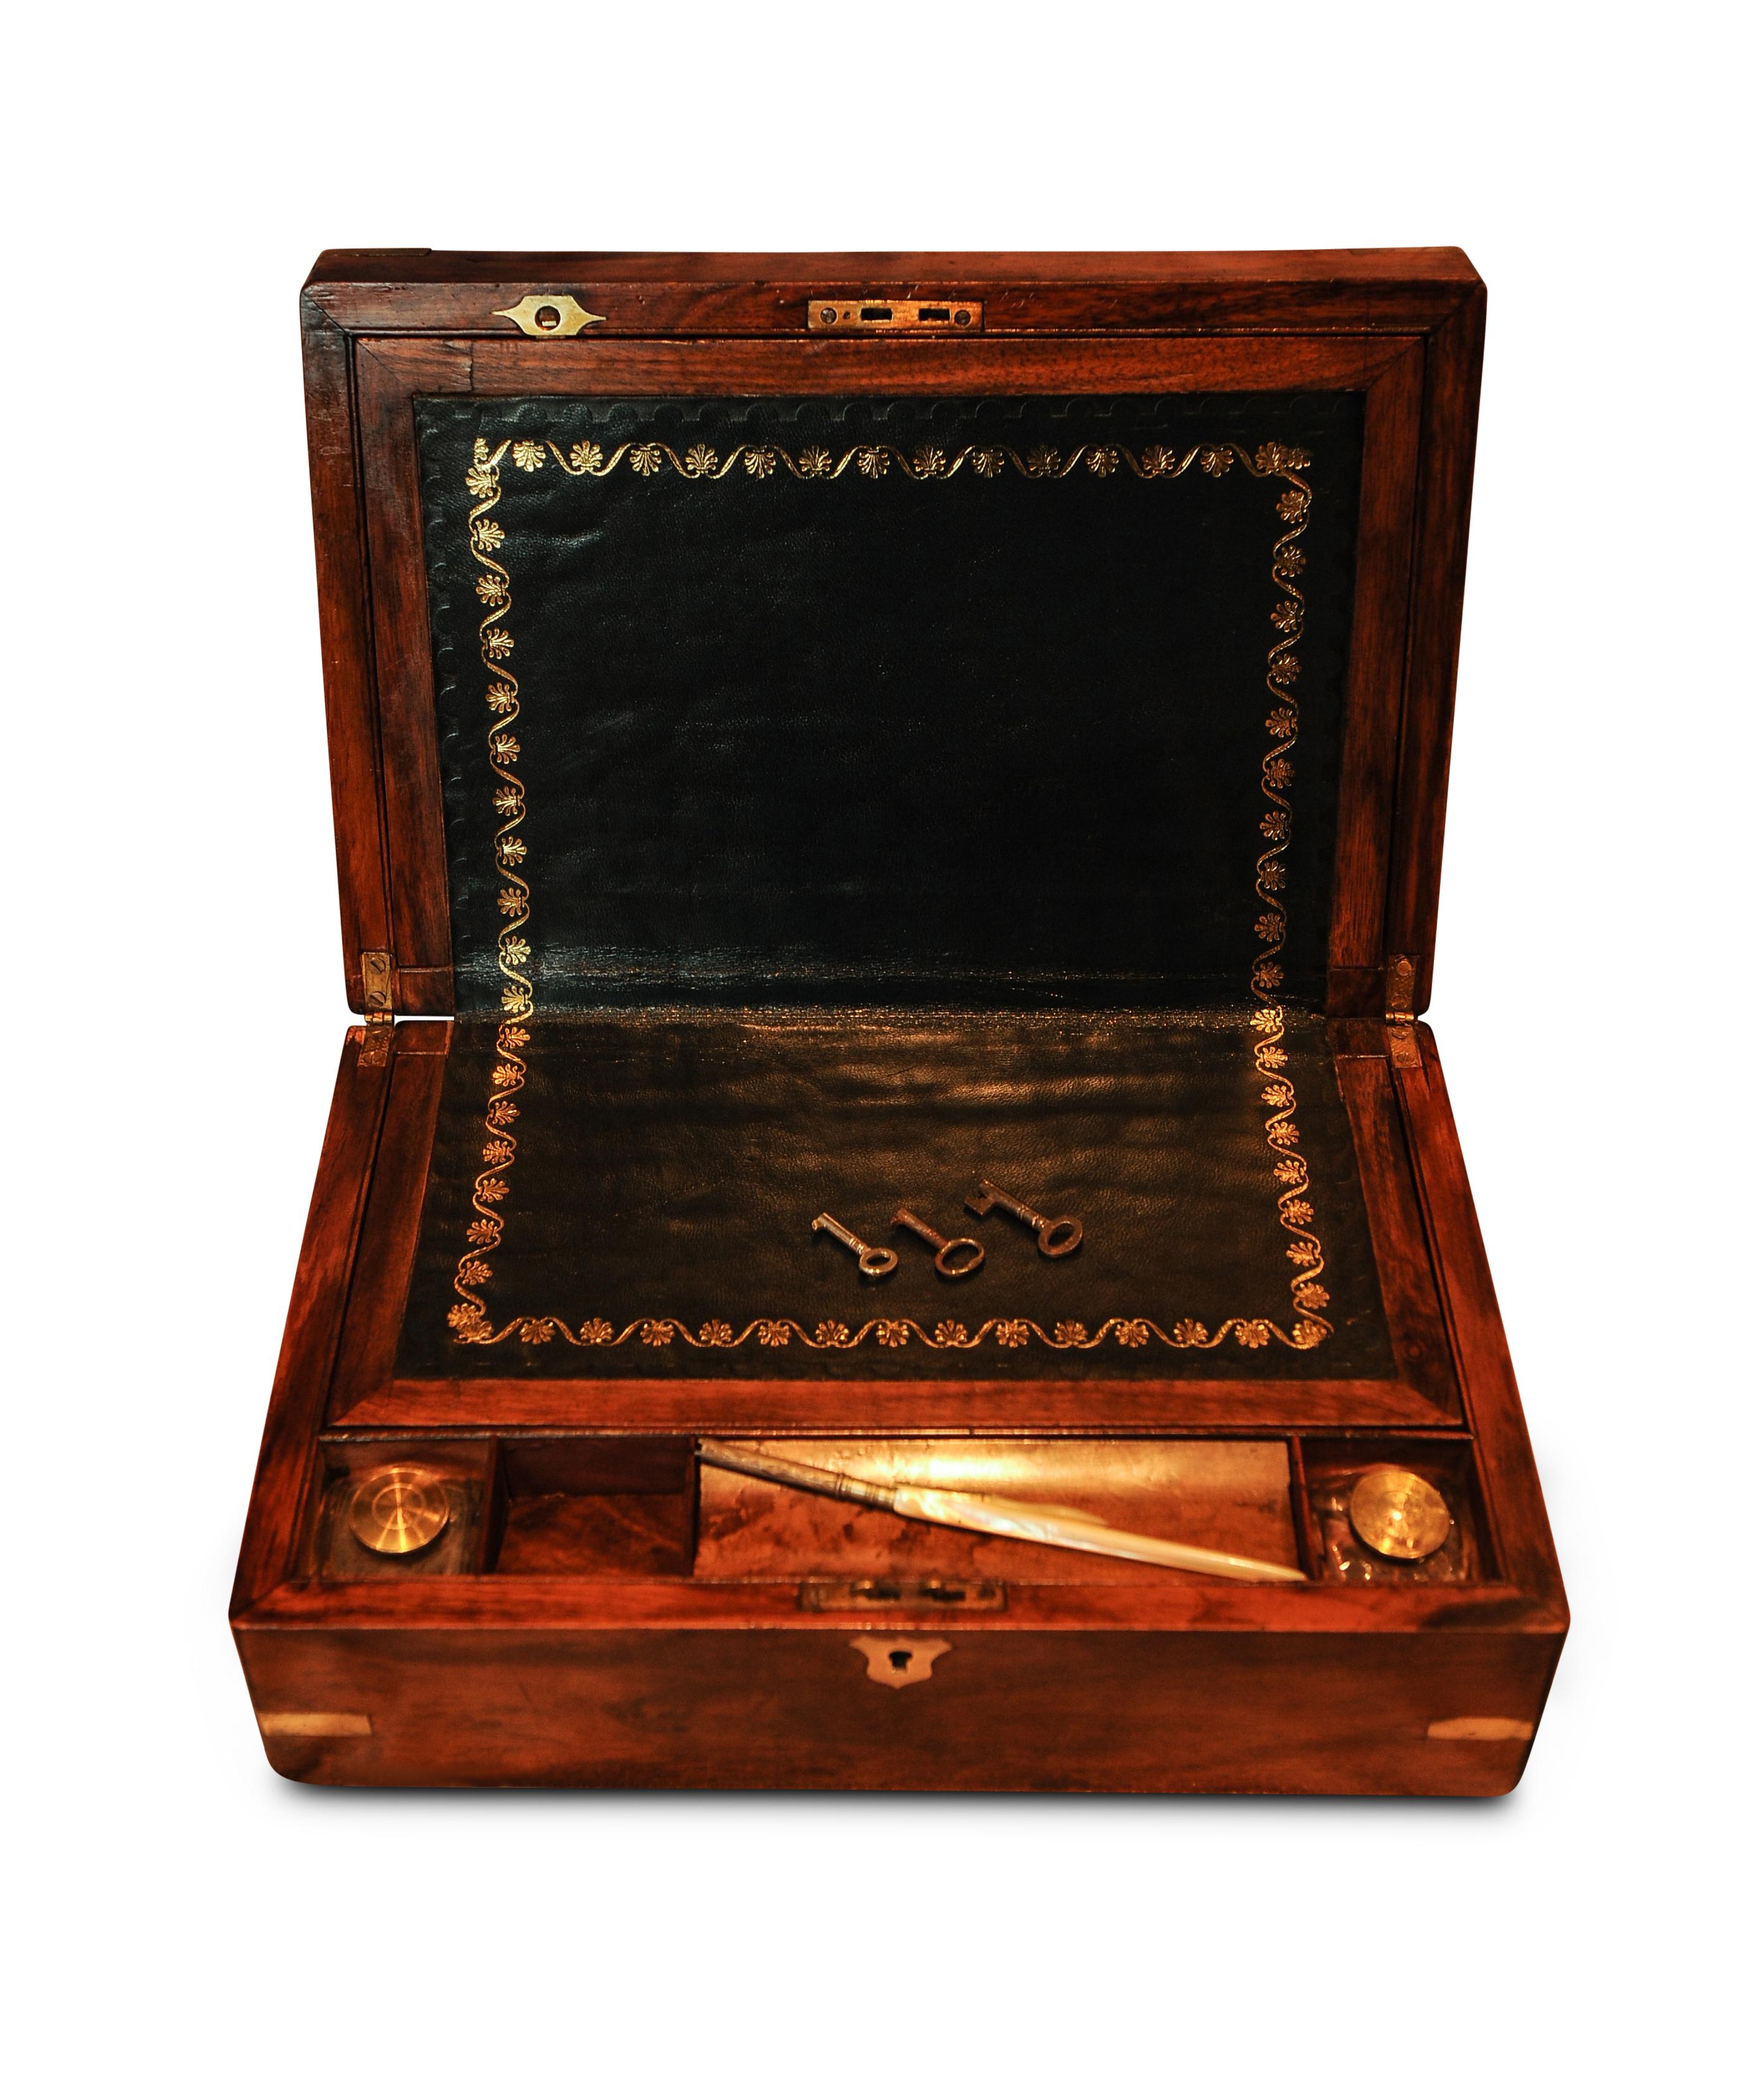 A military campaign brass bound walnut veneered writing slope,
opening to reveal the usual fitted interior with embossed black leather top.
2 glass ink pots in separate compartments with brass lids.
1 mother of pearl writing pen holder and mother